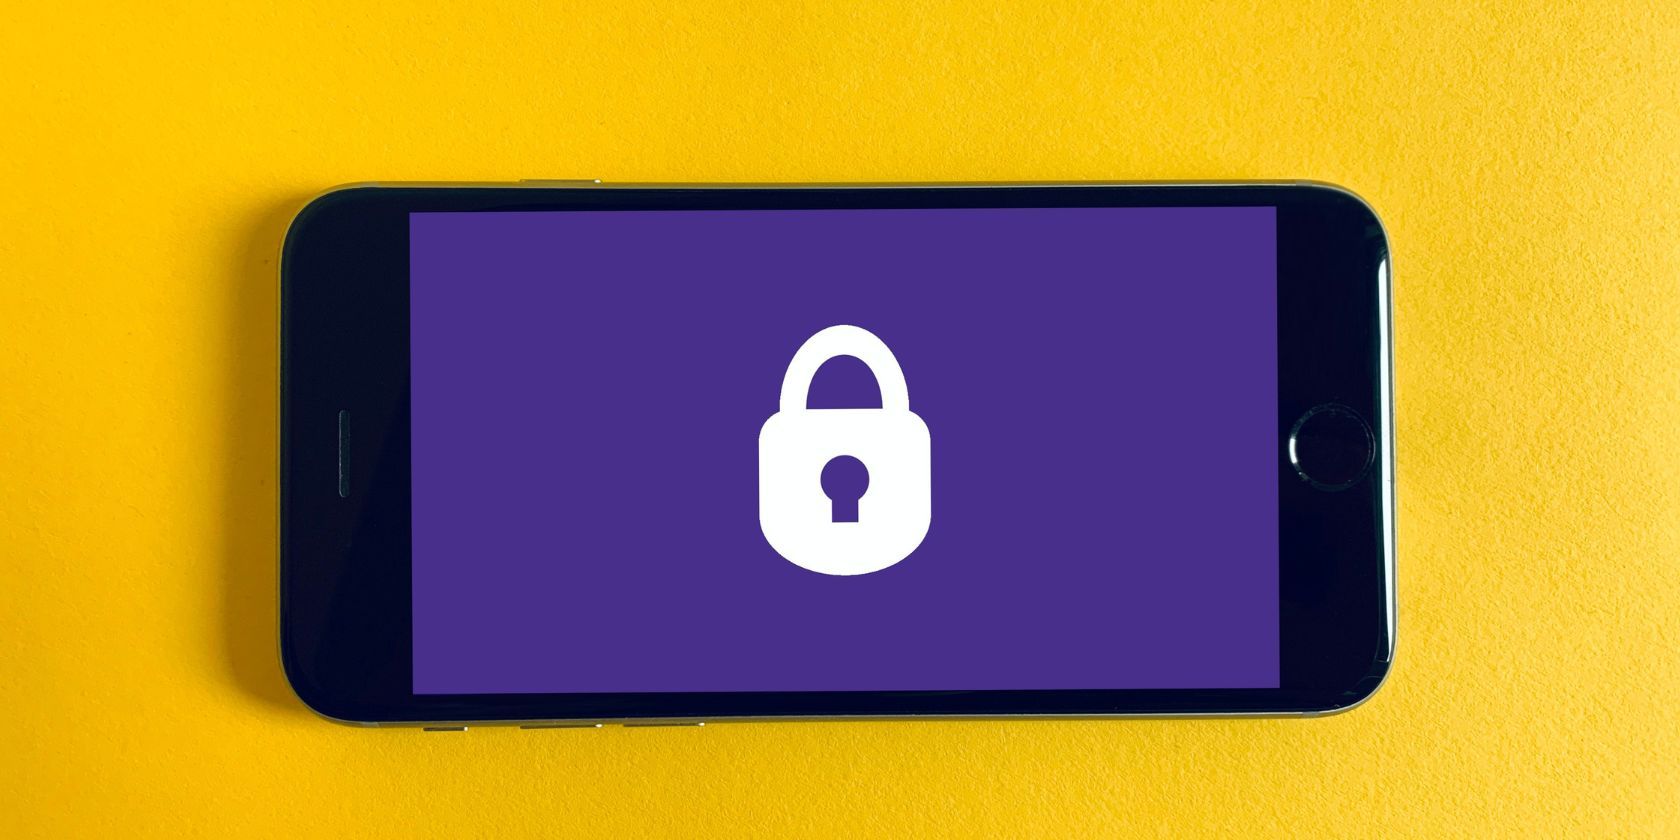 smartphone on yellow background with lock icon on screen